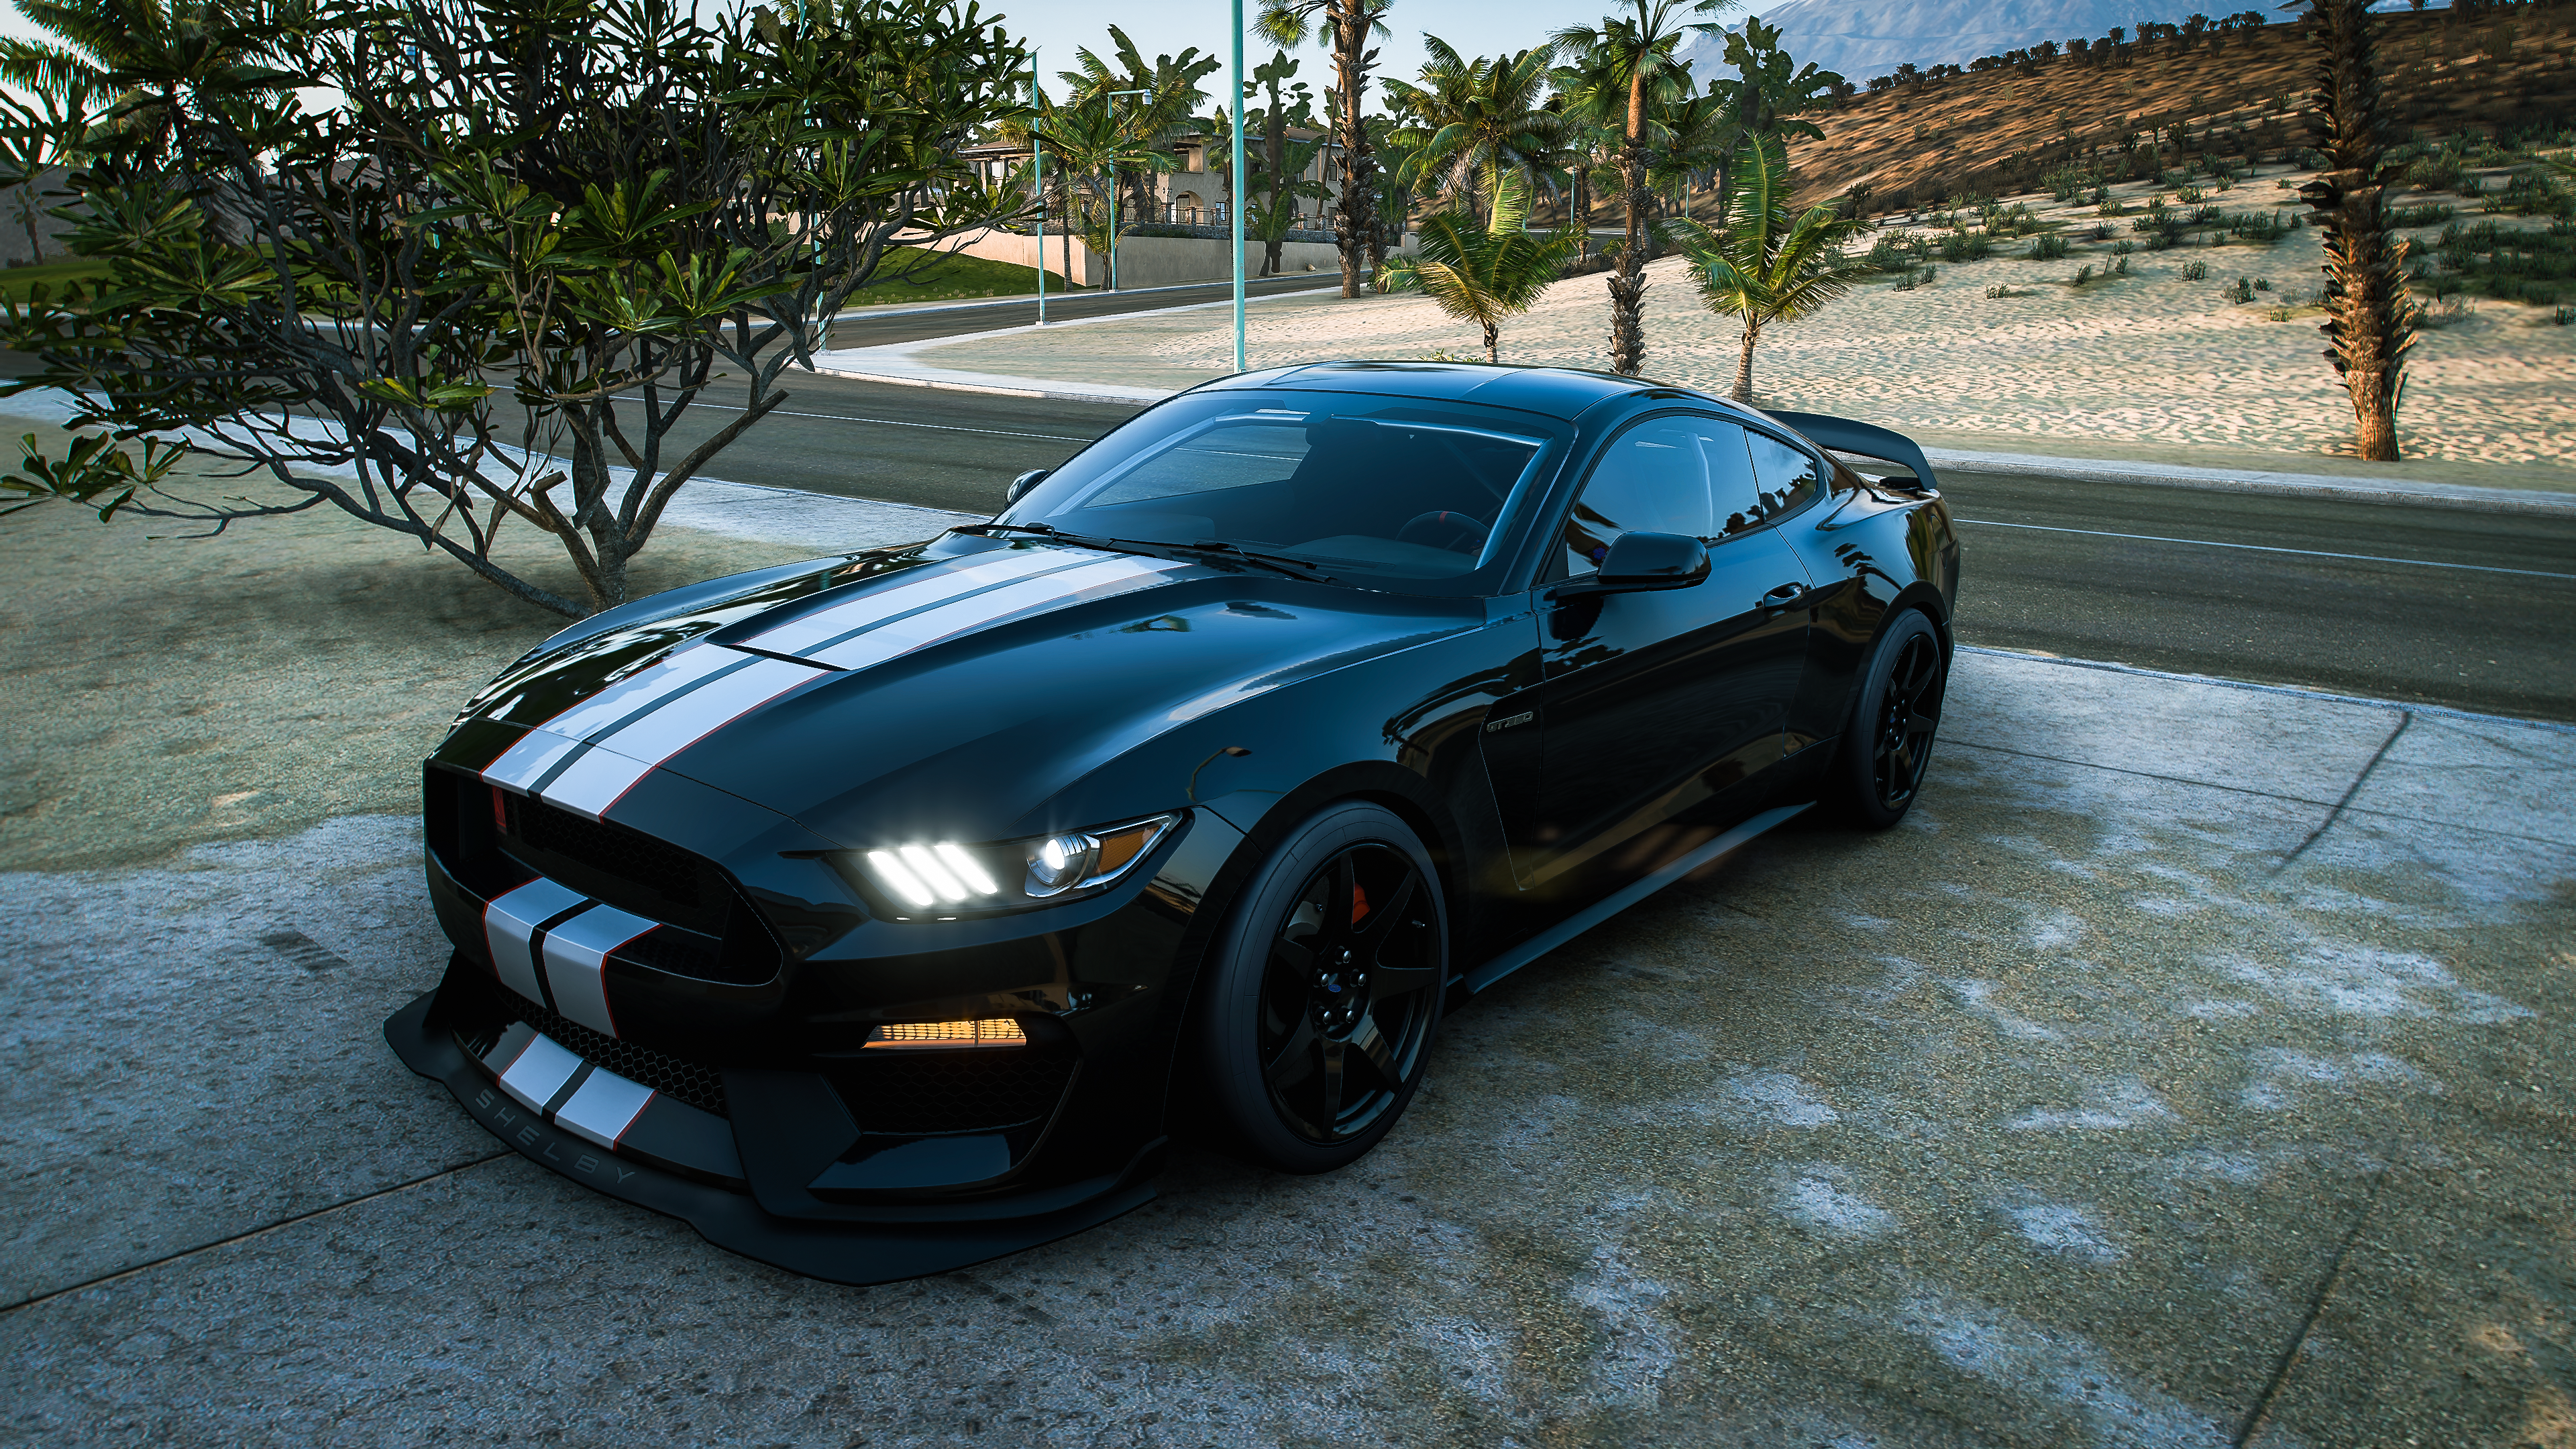 Forza Horizon 5 Forza Horizon Forza Ford Shelby Race Cars Video Games Video Game Art Garage Mexican  3840x2160